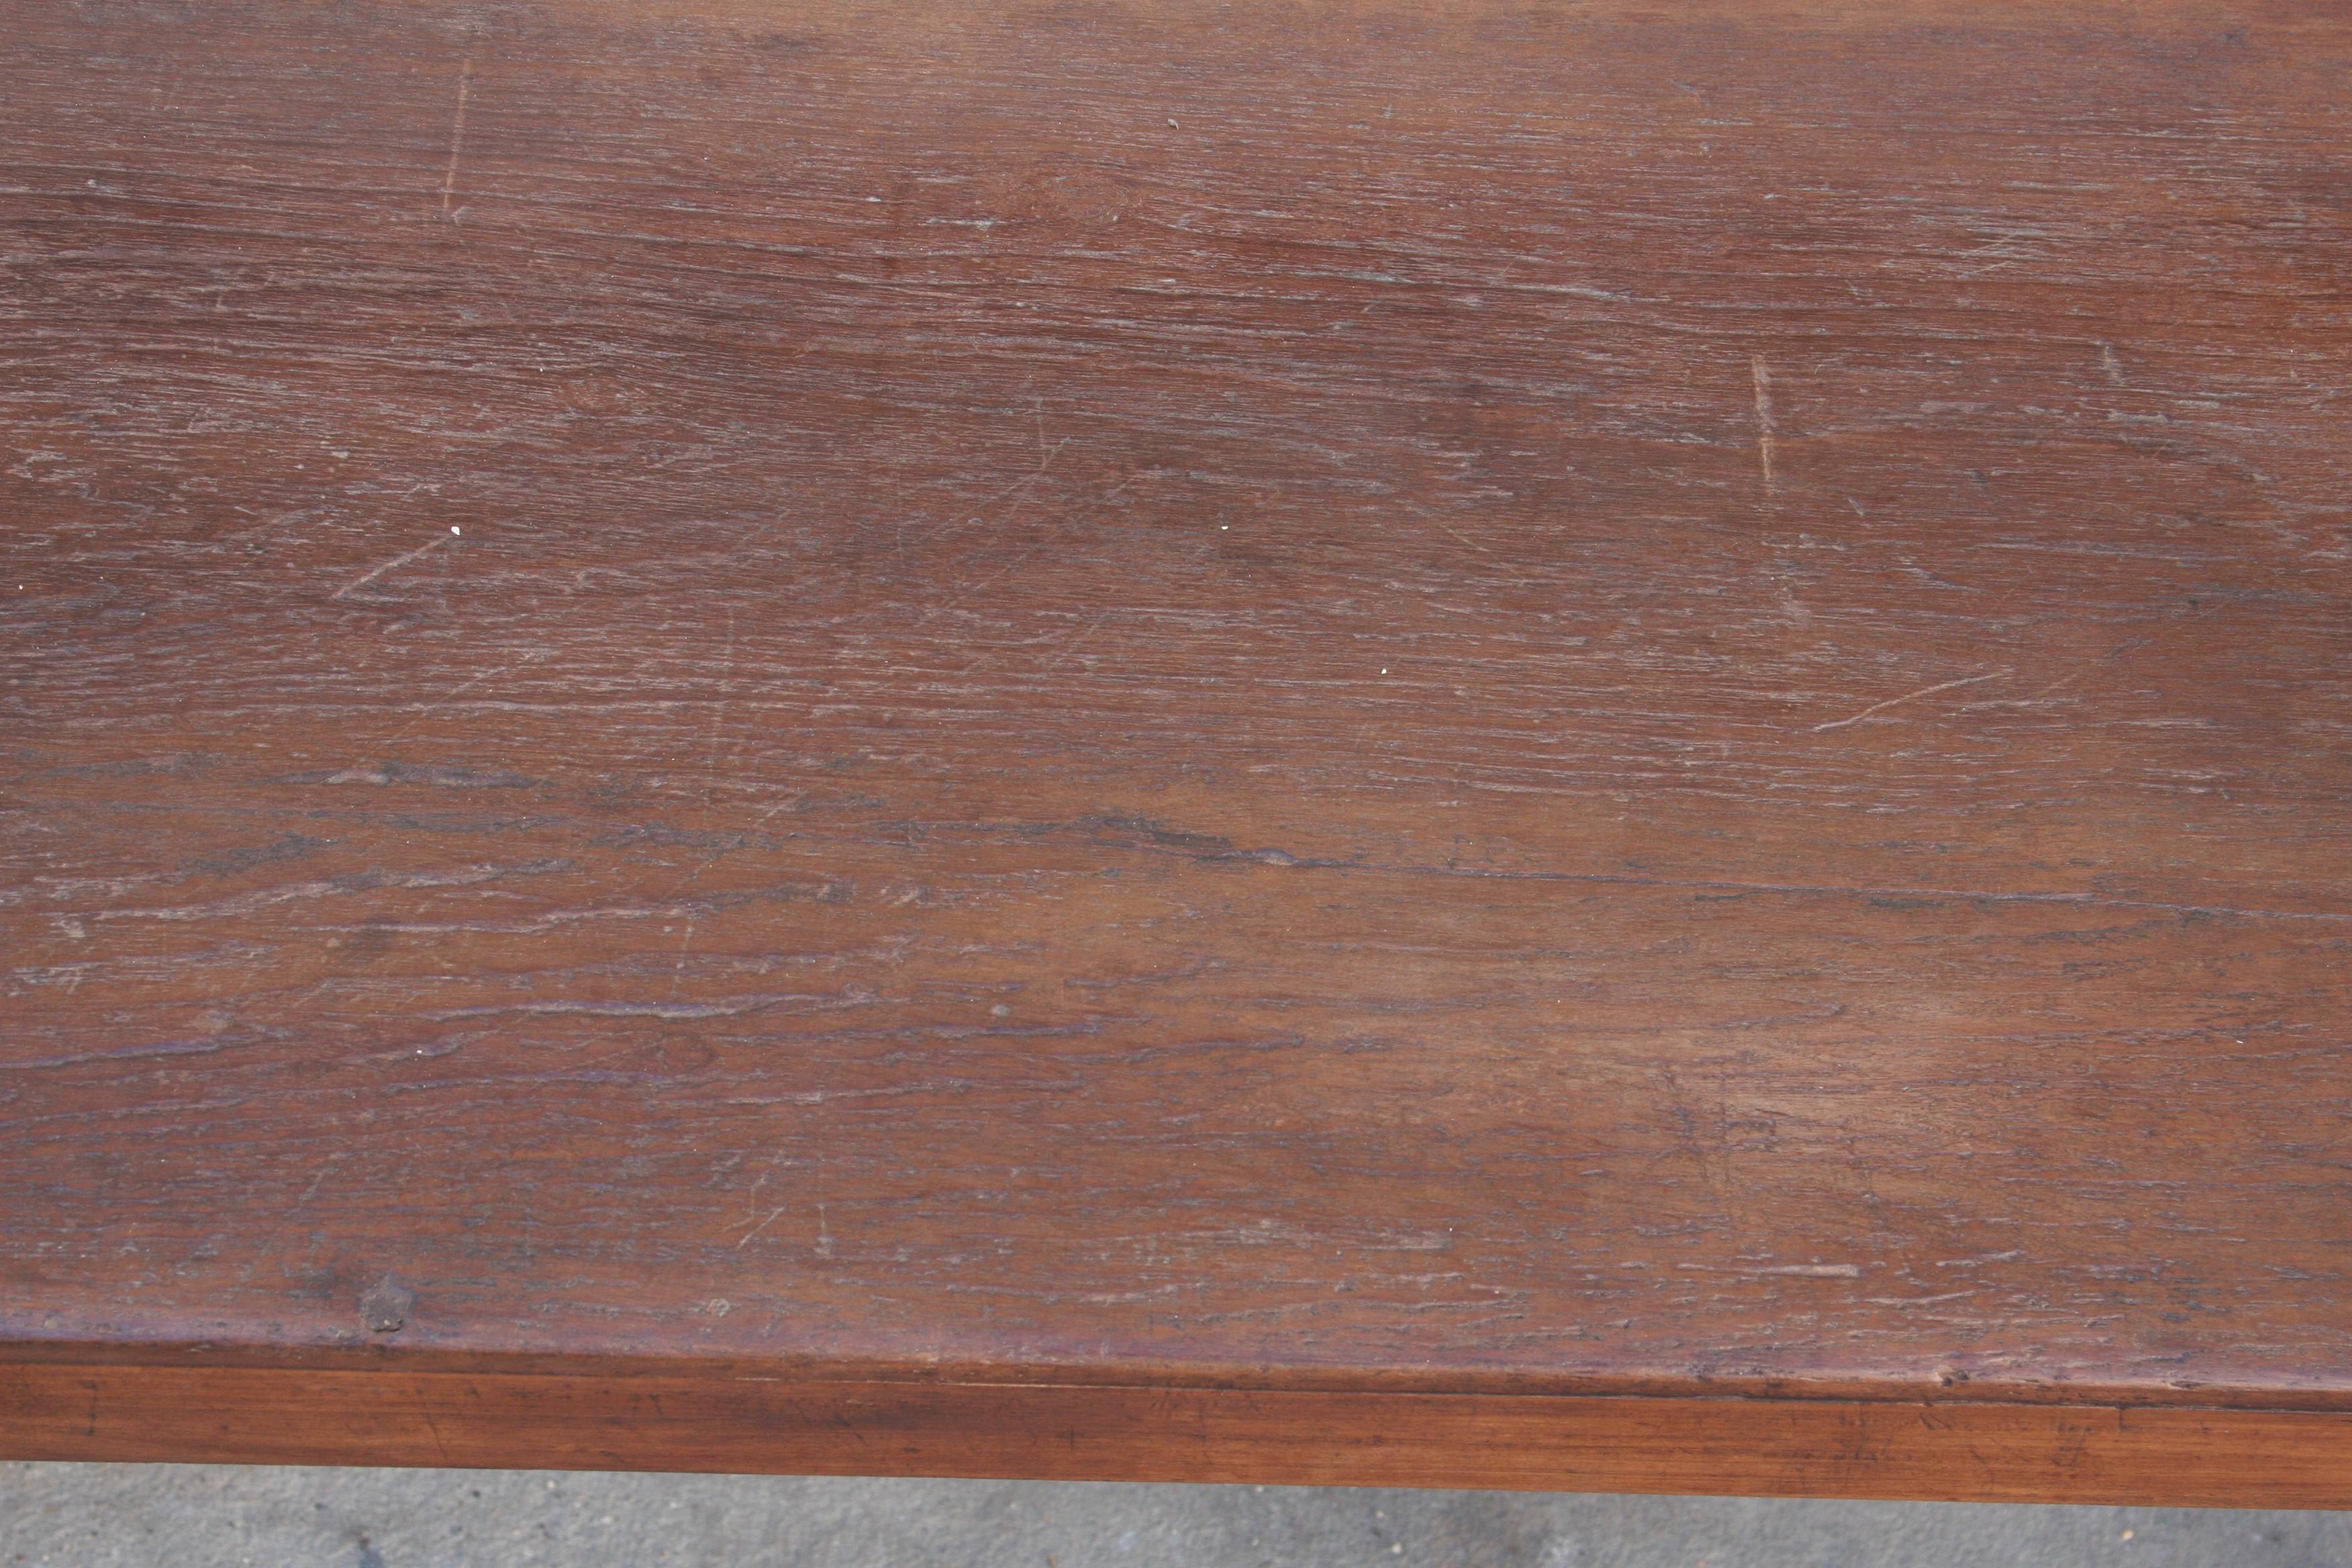 Rare 1910s Solid Teak Wood Handcrafted Bench from a Company Office 2